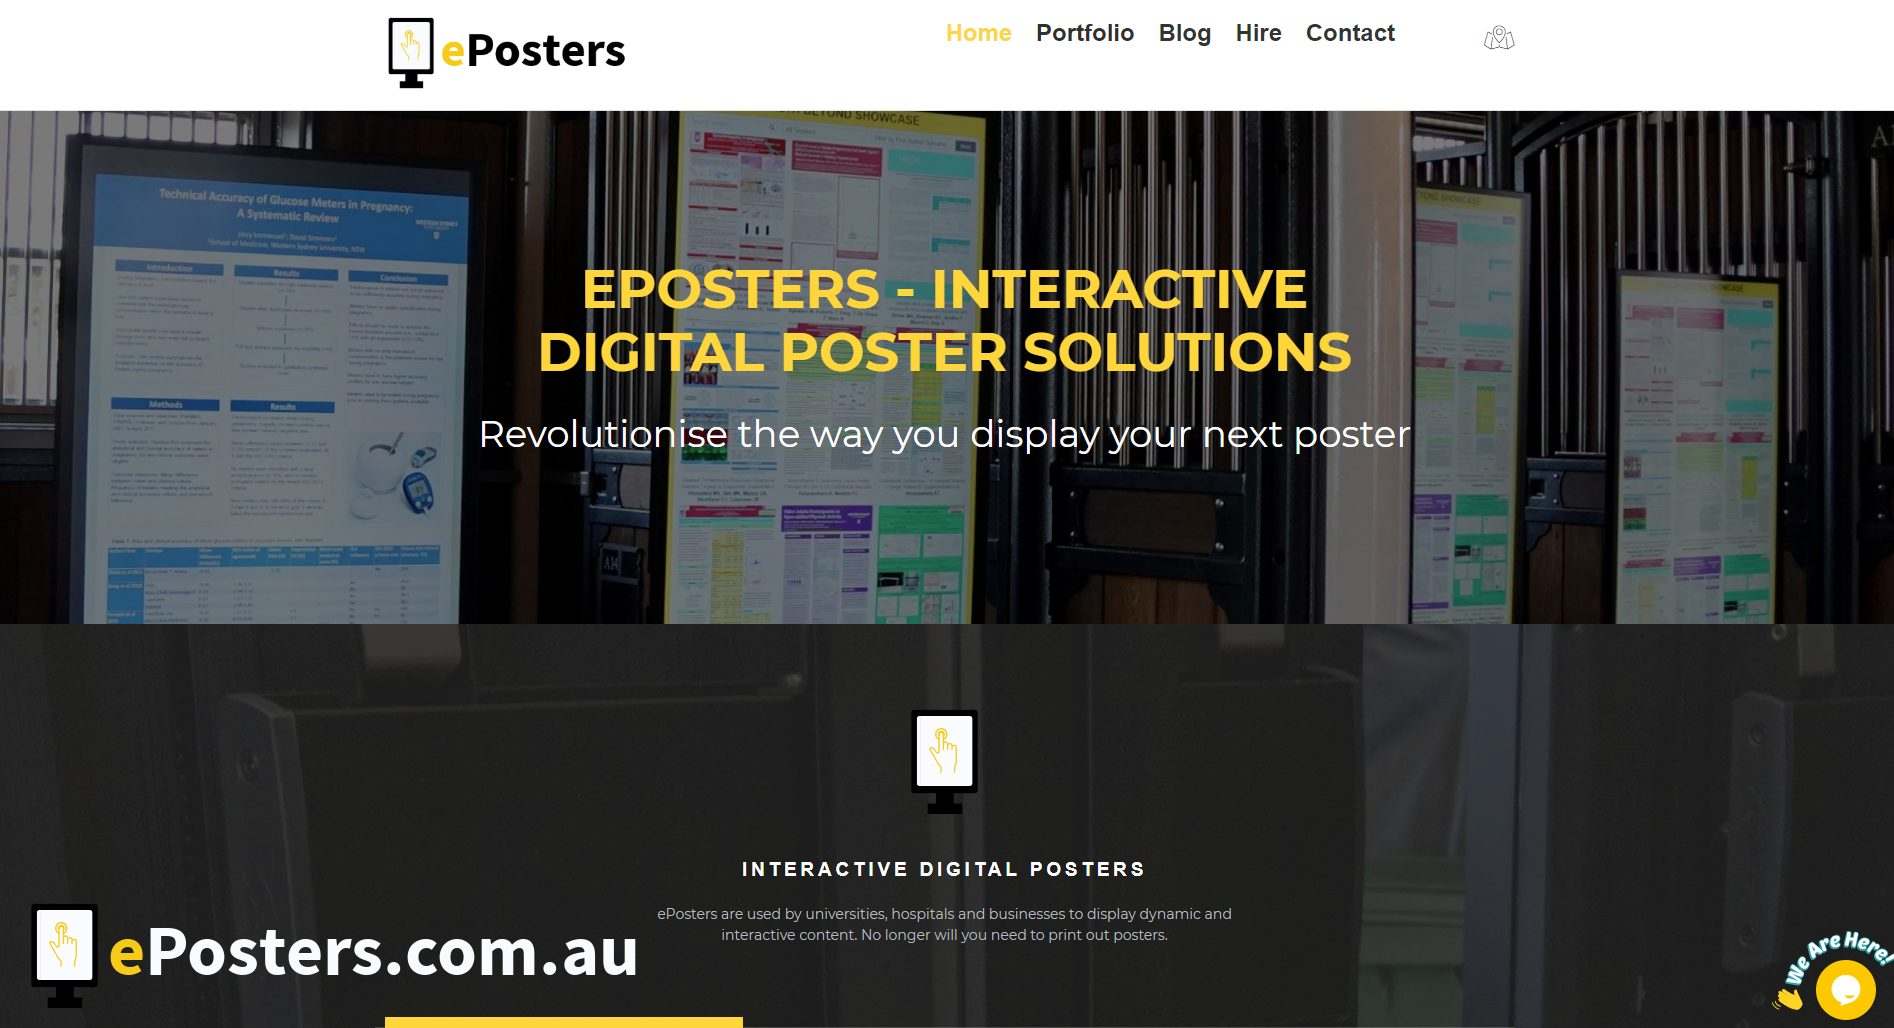 eposters website with logo